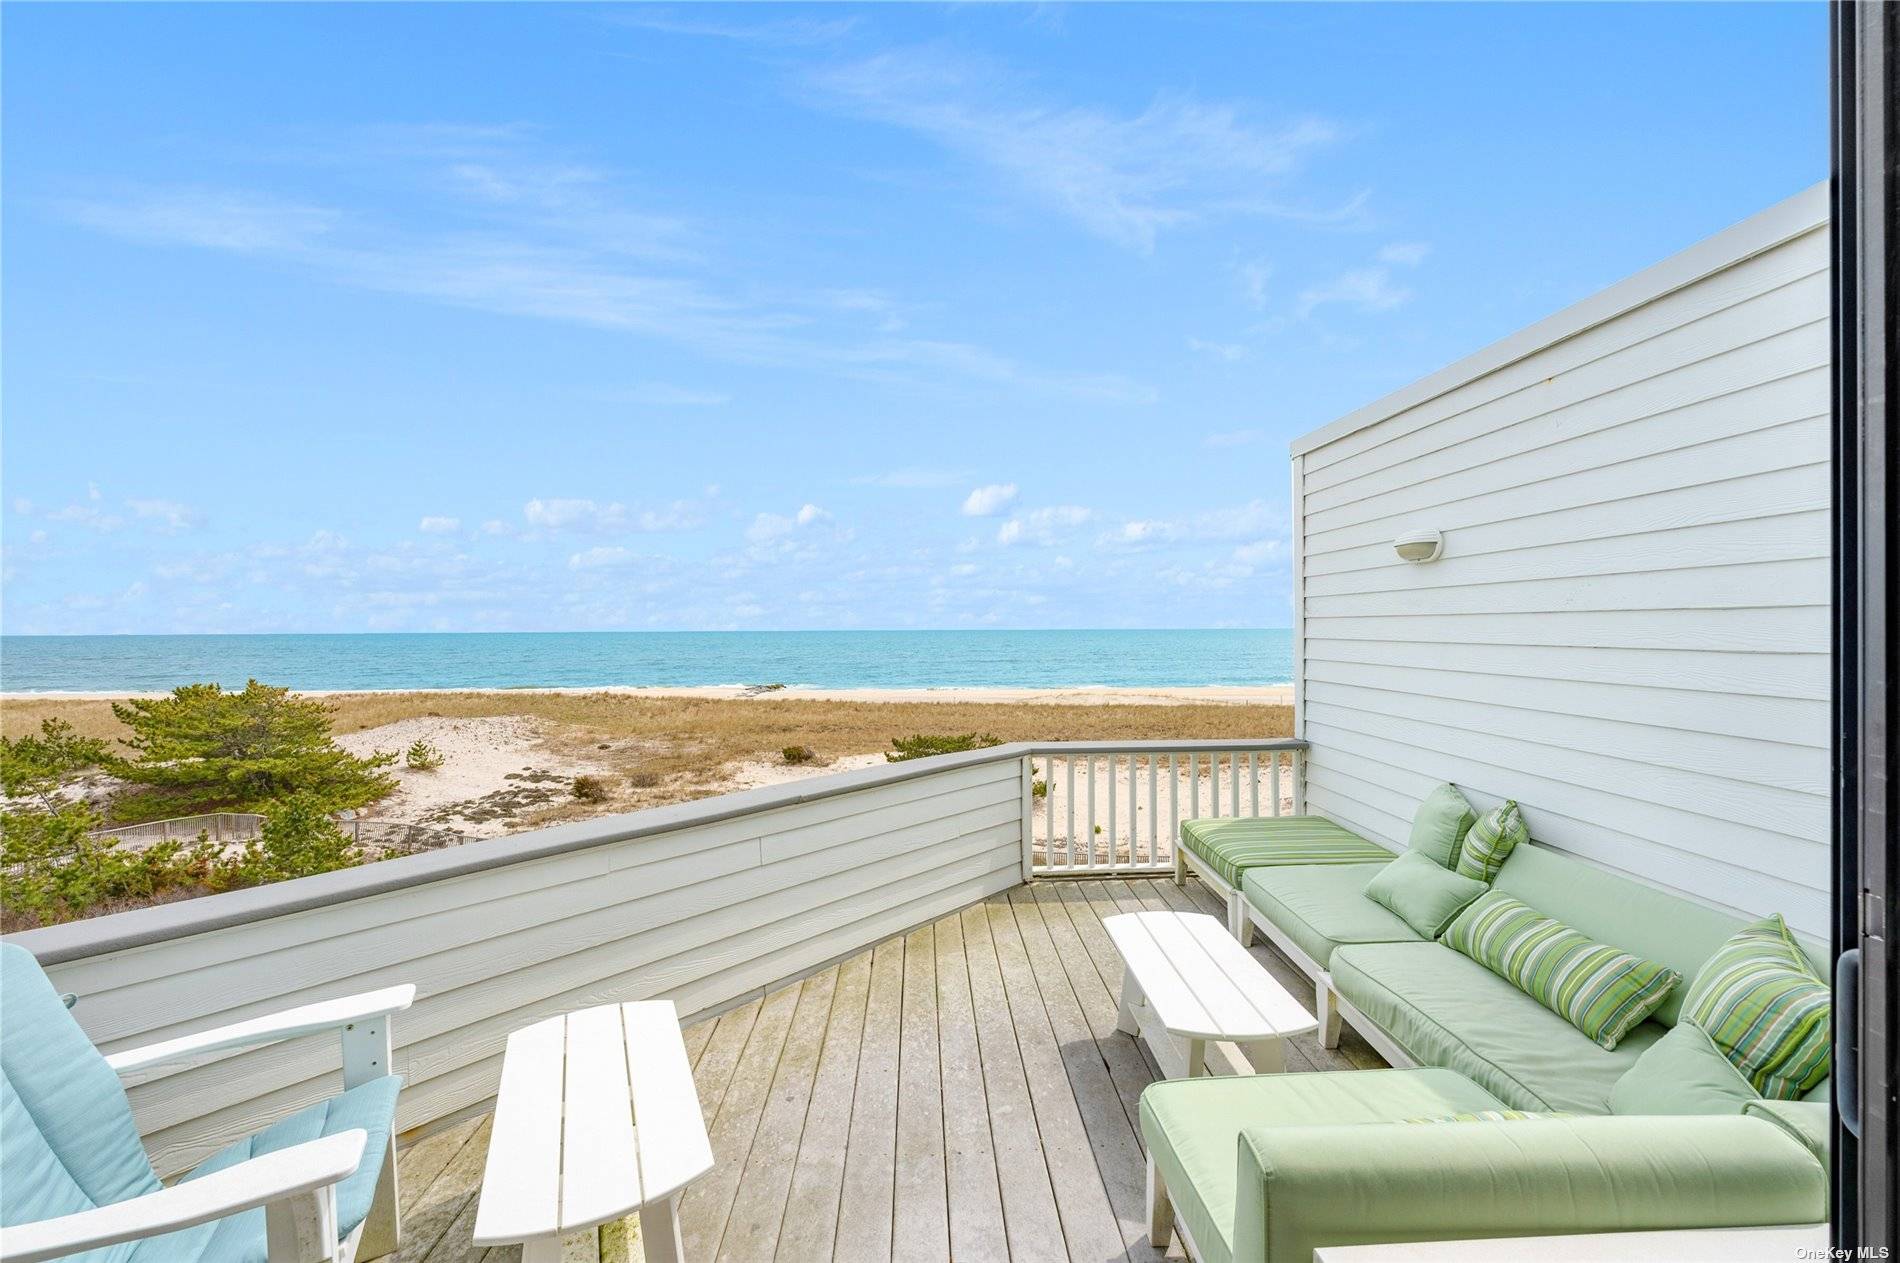 Enjoy expansive views from this oceanfront, top floor, corner unit at the Yardarm Condominiums in Westhampton Beach.